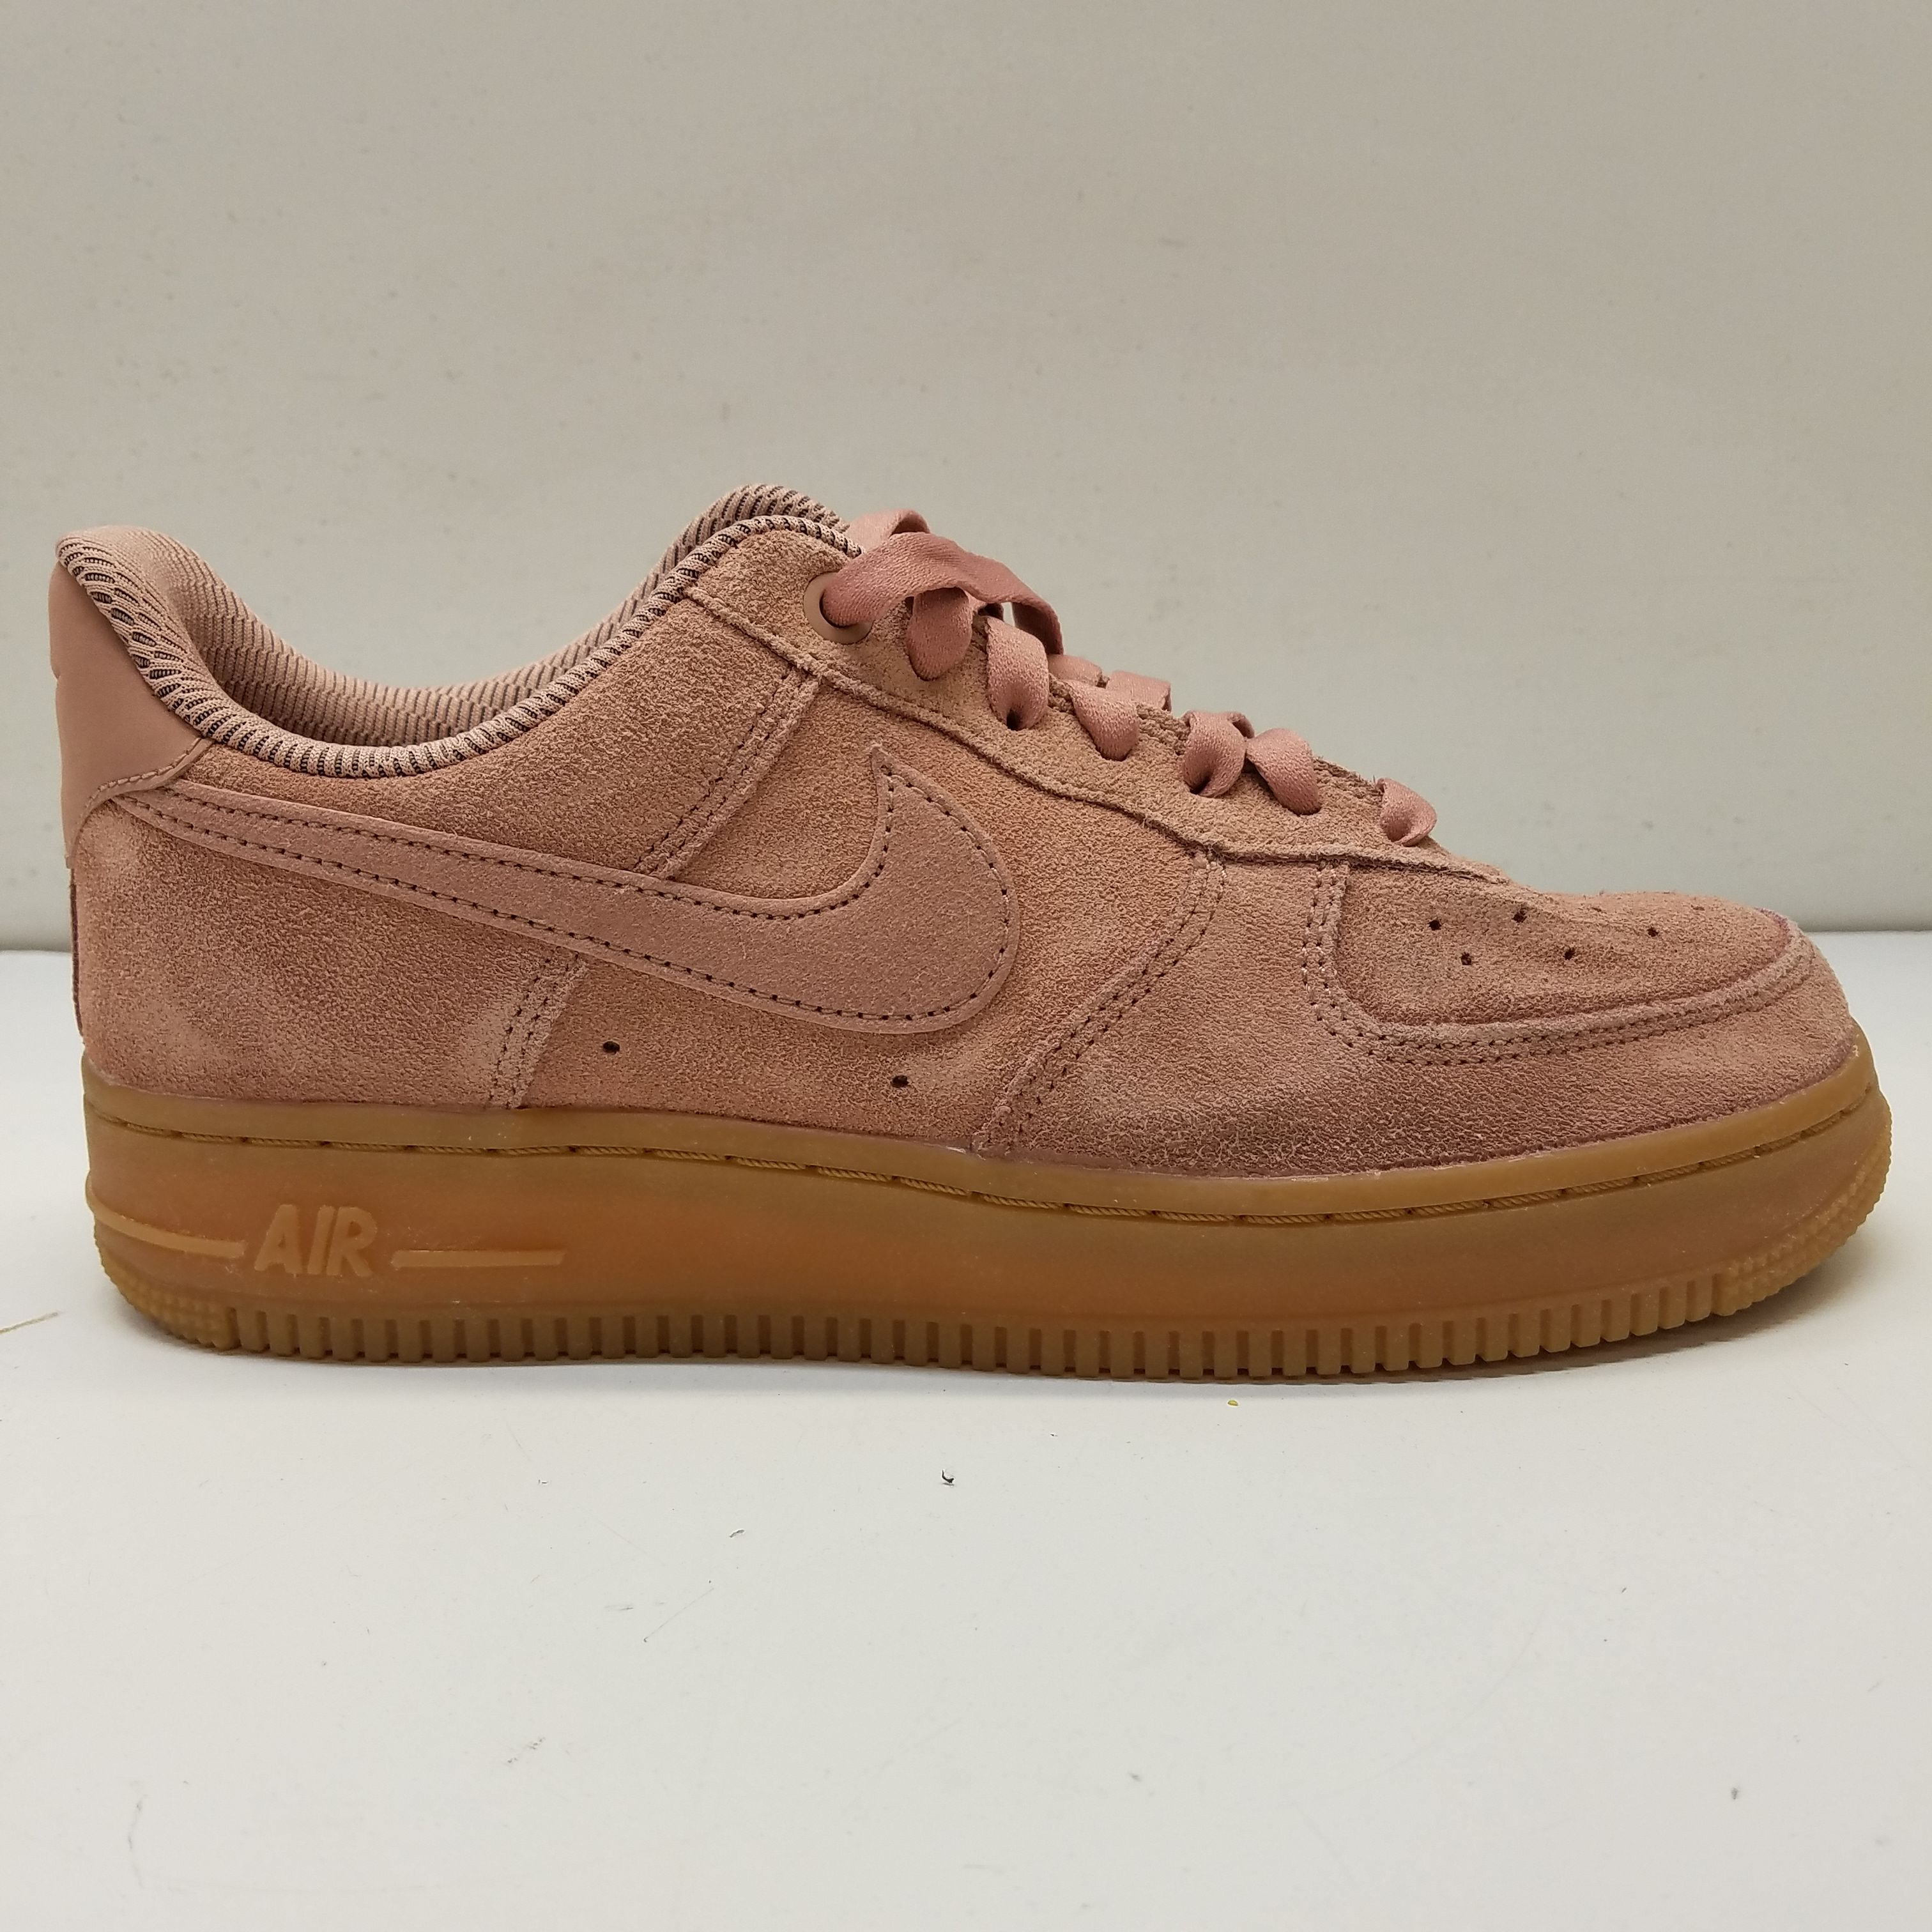 Buy the Nike Air Force 1 Low Particle Pink Gum Sneakers AA0287 